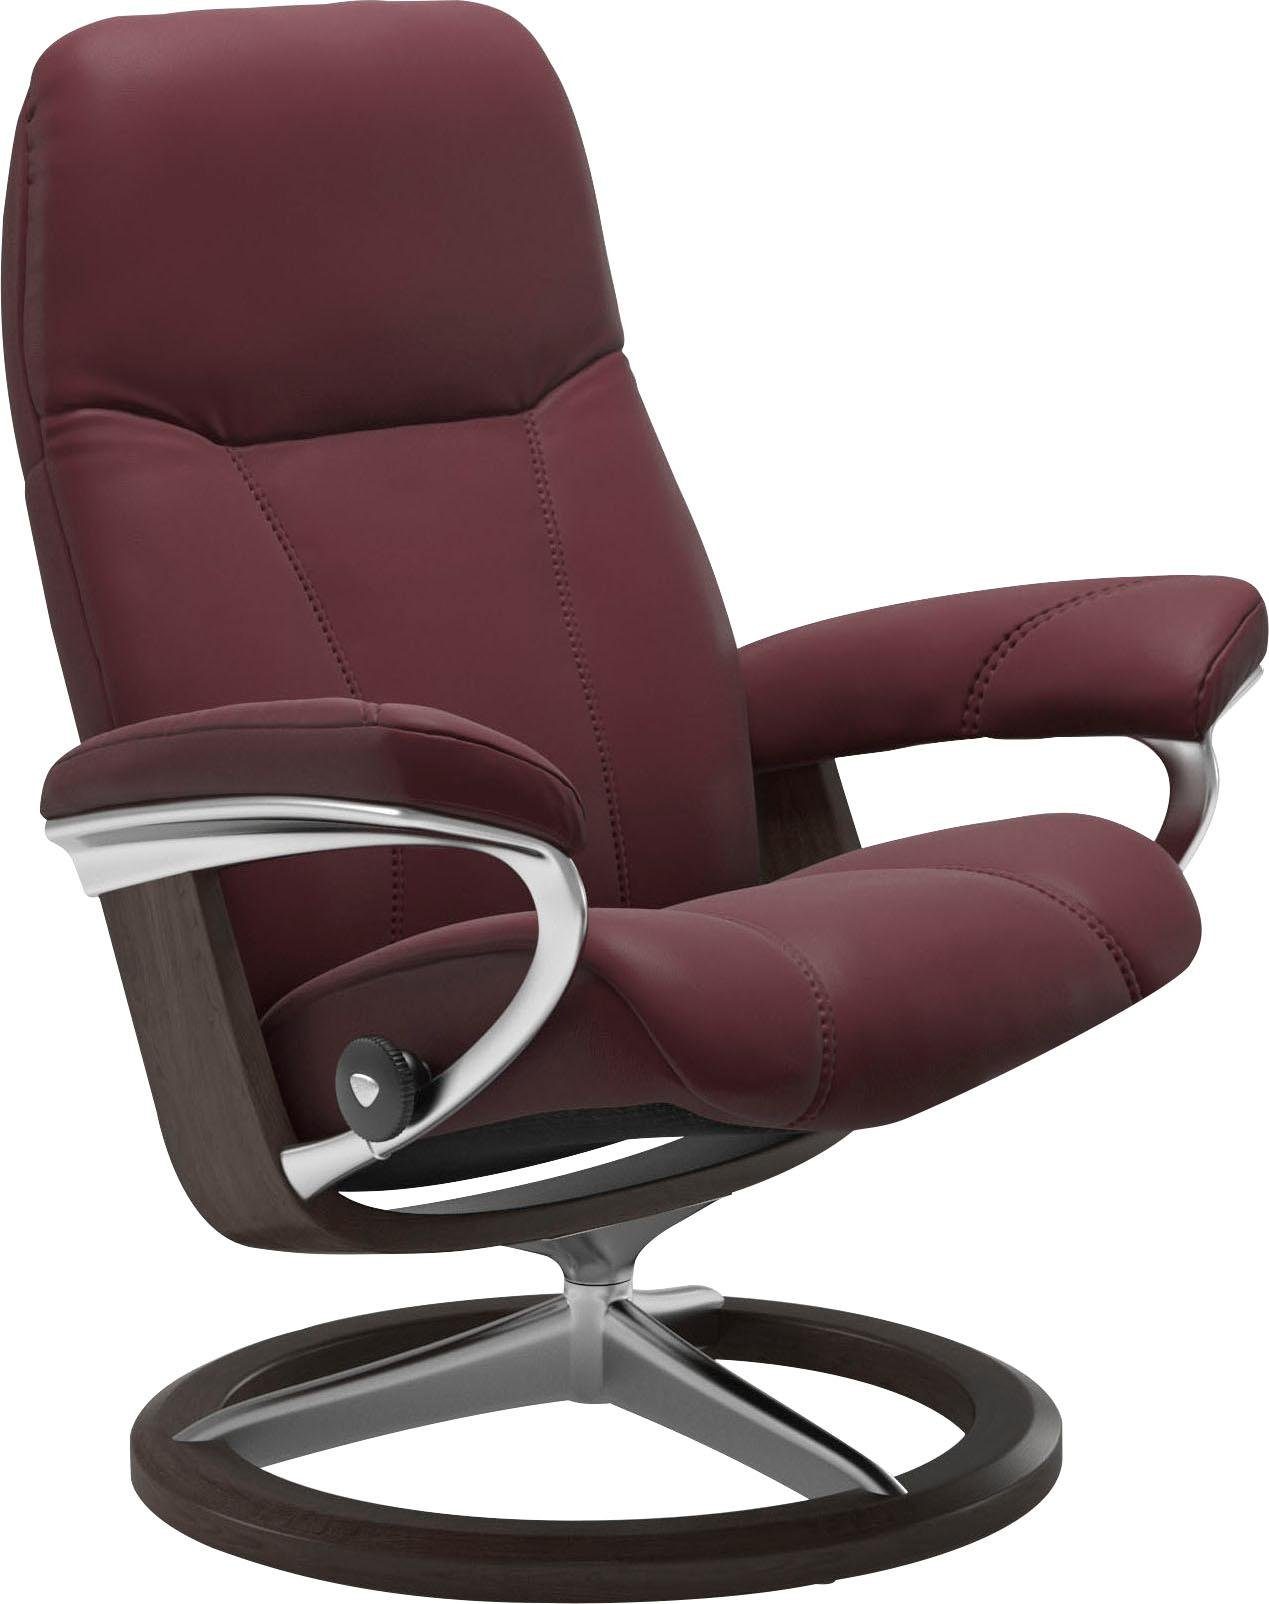 Stressless® Relaxsessel S, Gestell Wenge Größe Consul, Base, mit Signature